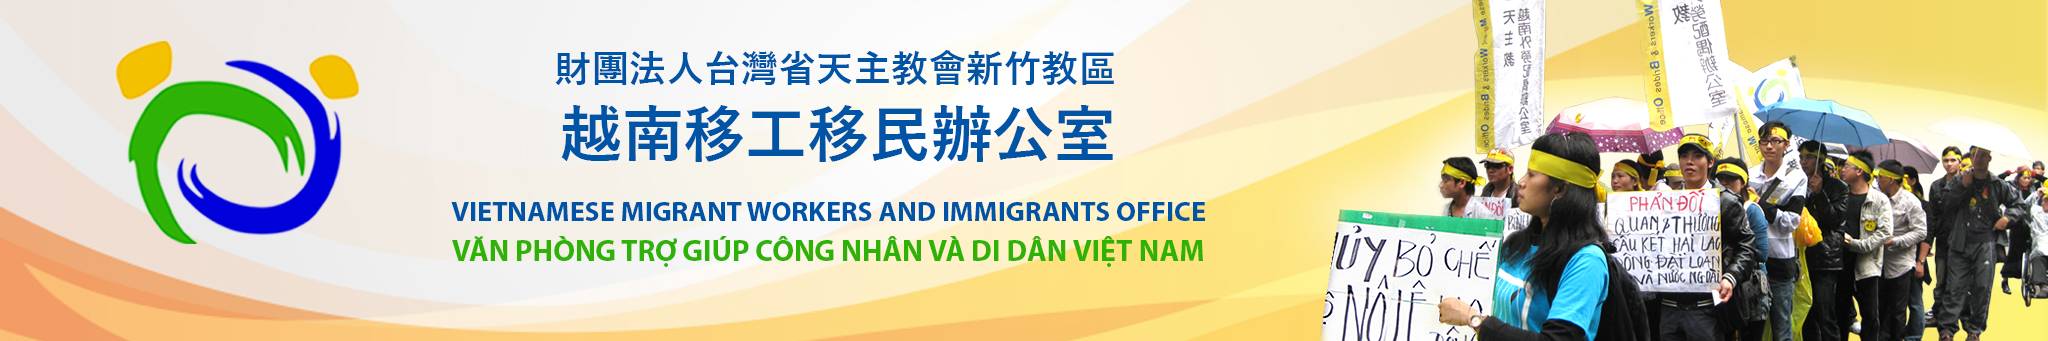 Vietnamese Migrant and Immigrant Office